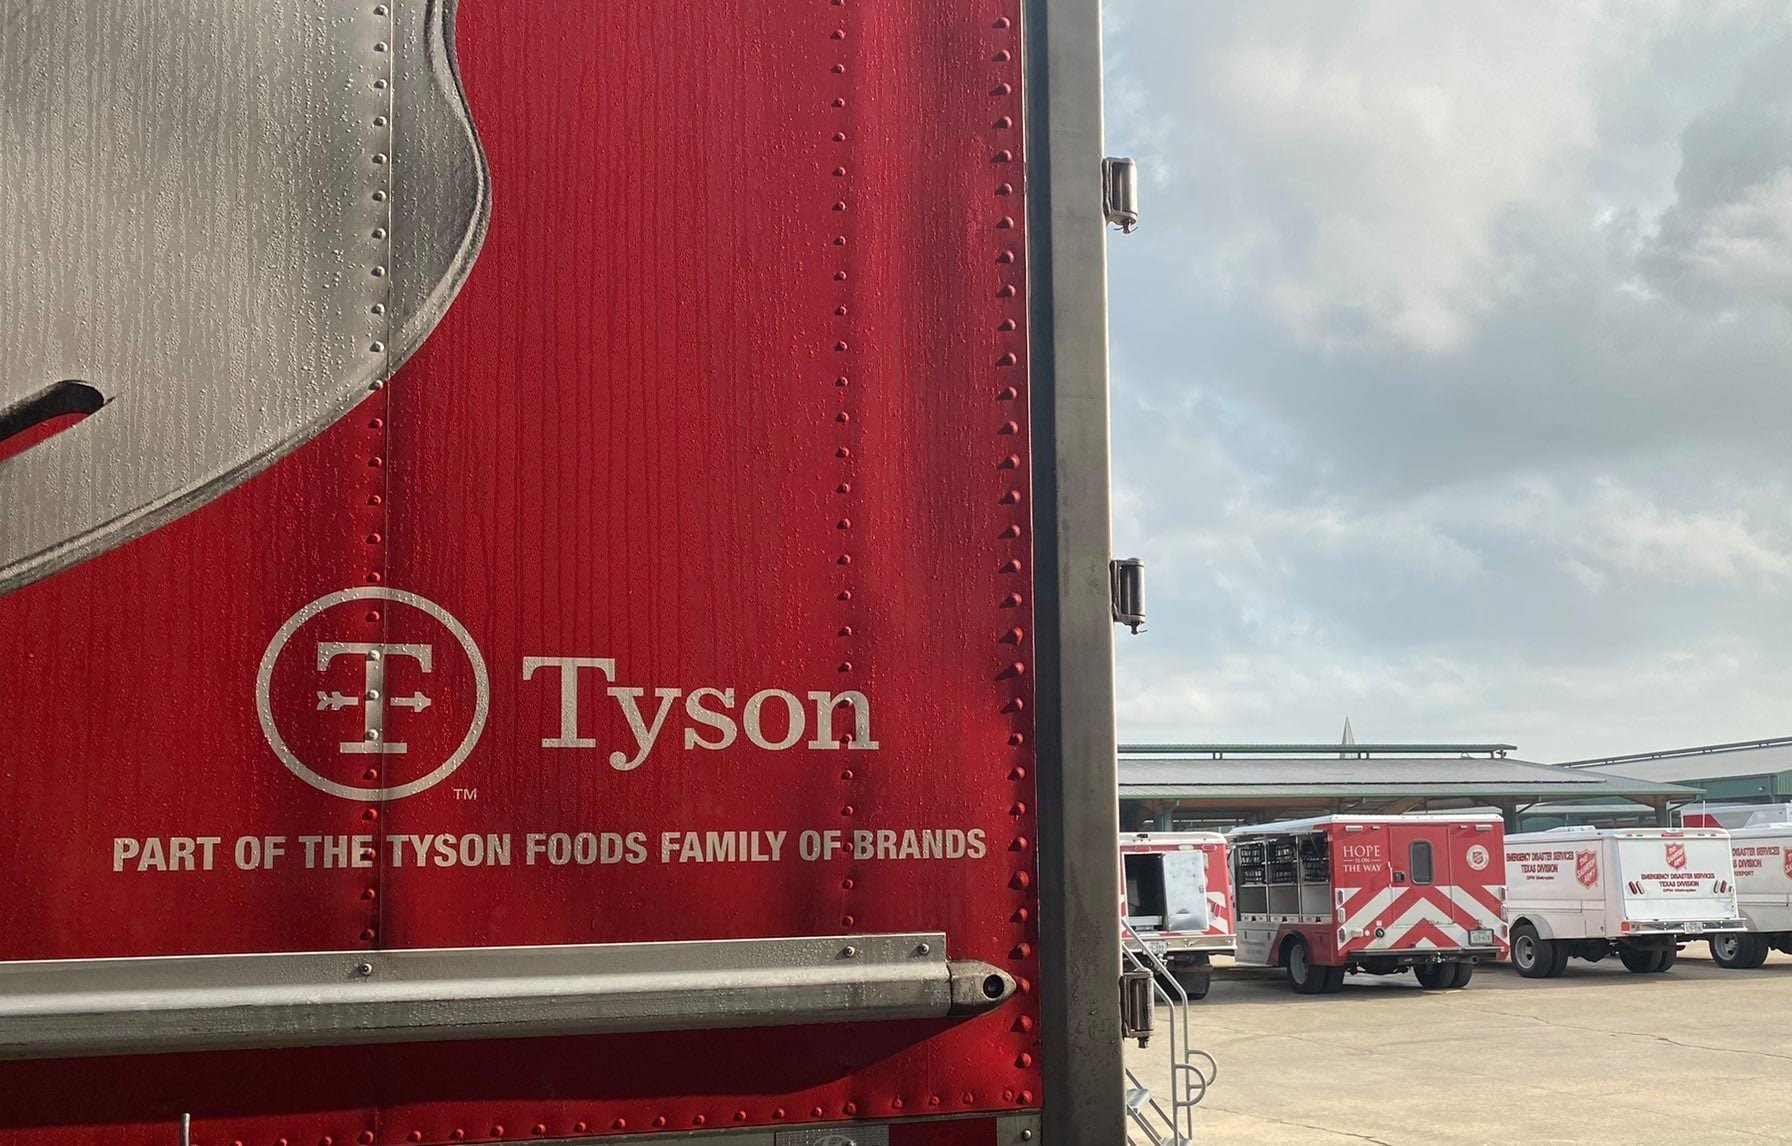 Tyson Foods splashes out again with Texas beef plant investment